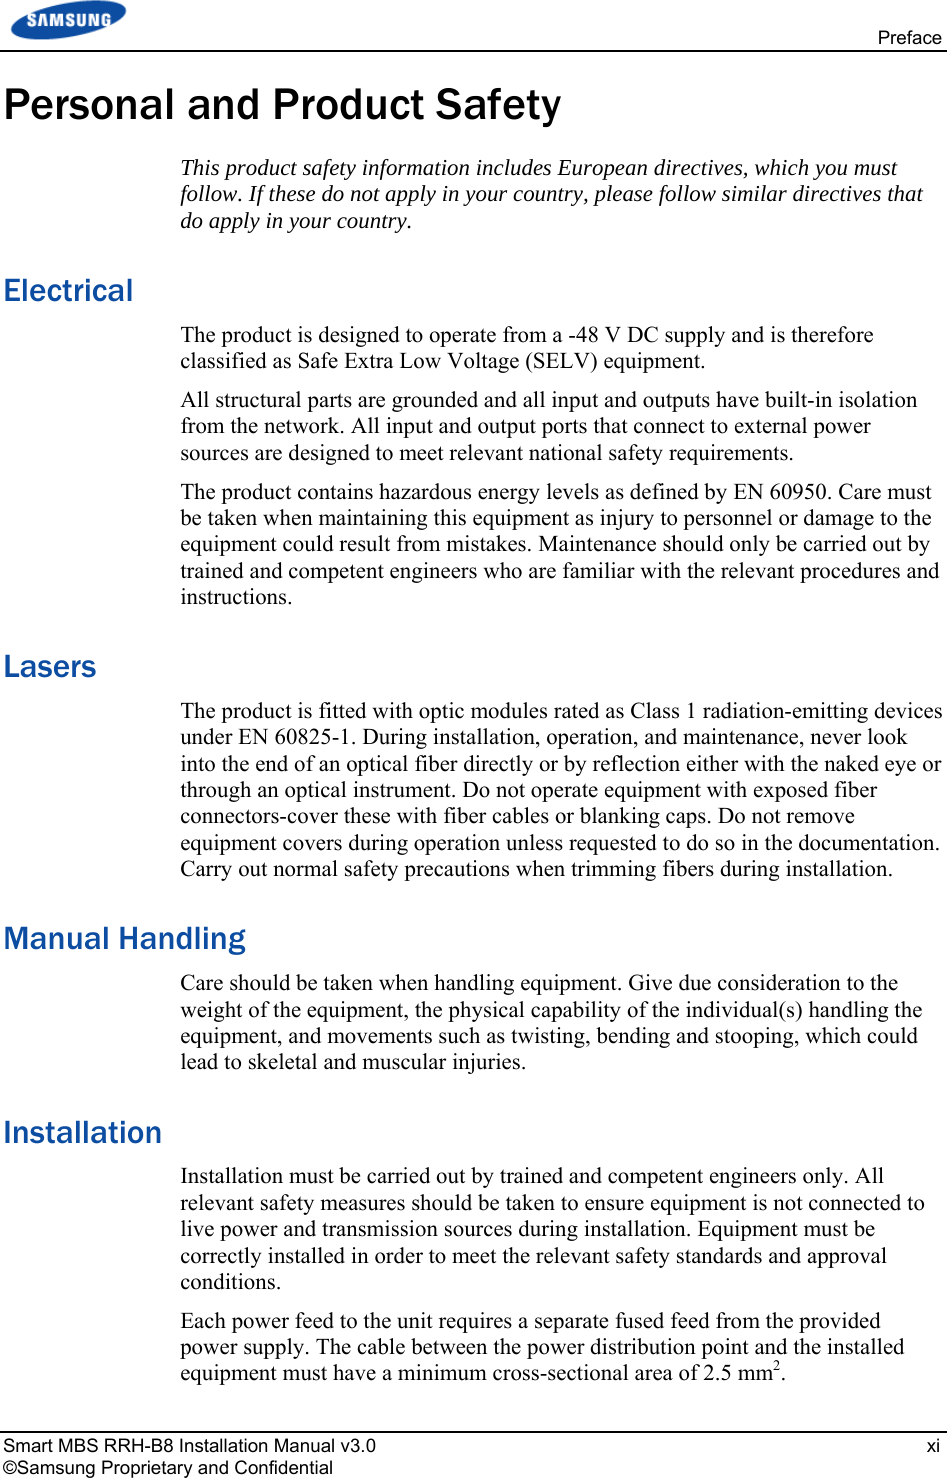  Preface Smart MBS RRH-B8 Installation Manual v3.0   xi ©Samsung Proprietary and Confidential Personal and Product Safety This product safety information includes European directives, which you must follow. If these do not apply in your country, please follow similar directives that do apply in your country. Electrical The product is designed to operate from a -48 V DC supply and is therefore classified as Safe Extra Low Voltage (SELV) equipment. All structural parts are grounded and all input and outputs have built-in isolation from the network. All input and output ports that connect to external power sources are designed to meet relevant national safety requirements. The product contains hazardous energy levels as defined by EN 60950. Care must be taken when maintaining this equipment as injury to personnel or damage to the equipment could result from mistakes. Maintenance should only be carried out by trained and competent engineers who are familiar with the relevant procedures and instructions. Lasers The product is fitted with optic modules rated as Class 1 radiation-emitting devices under EN 60825-1. During installation, operation, and maintenance, never look into the end of an optical fiber directly or by reflection either with the naked eye or through an optical instrument. Do not operate equipment with exposed fiber connectors-cover these with fiber cables or blanking caps. Do not remove equipment covers during operation unless requested to do so in the documentation. Carry out normal safety precautions when trimming fibers during installation. Manual Handling Care should be taken when handling equipment. Give due consideration to the weight of the equipment, the physical capability of the individual(s) handling the equipment, and movements such as twisting, bending and stooping, which could lead to skeletal and muscular injuries. Installation Installation must be carried out by trained and competent engineers only. All relevant safety measures should be taken to ensure equipment is not connected to live power and transmission sources during installation. Equipment must be correctly installed in order to meet the relevant safety standards and approval conditions. Each power feed to the unit requires a separate fused feed from the provided power supply. The cable between the power distribution point and the installed equipment must have a minimum cross-sectional area of 2.5 mm2. 